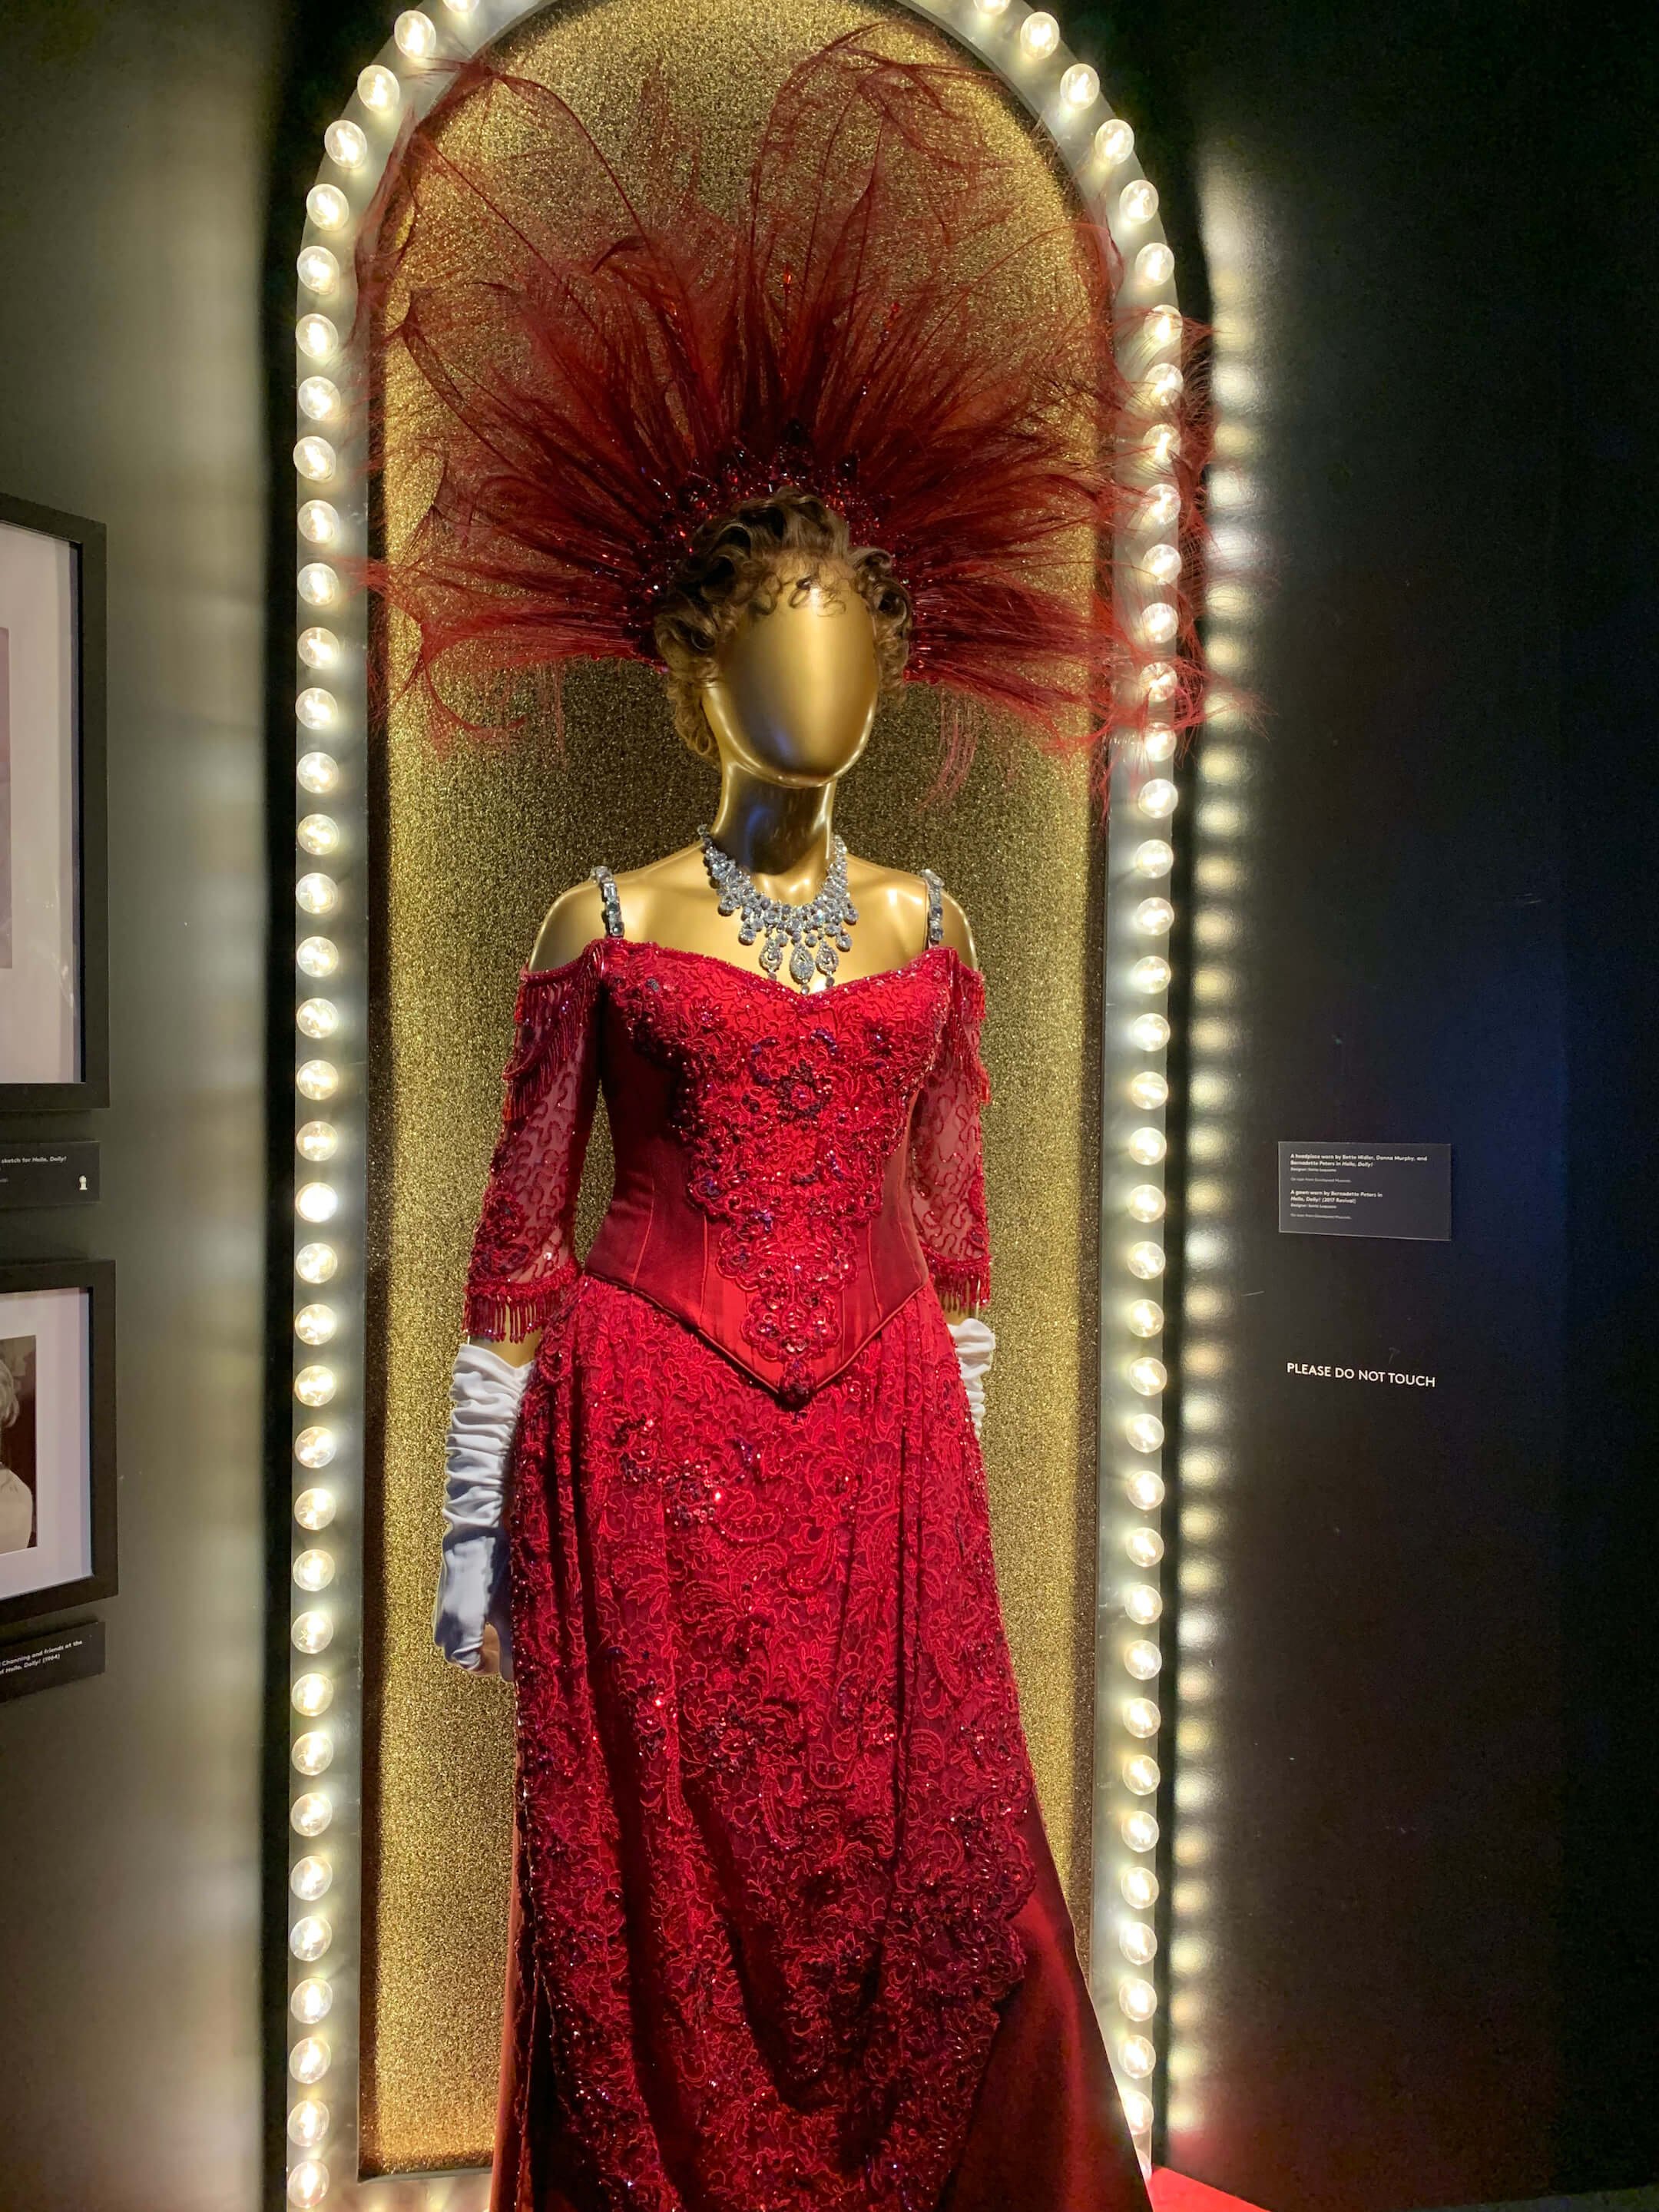  Gown worn by Bernadette Peters in the 2017 revival of  Hello, Dolly!   Designed by Santo Loquasto 